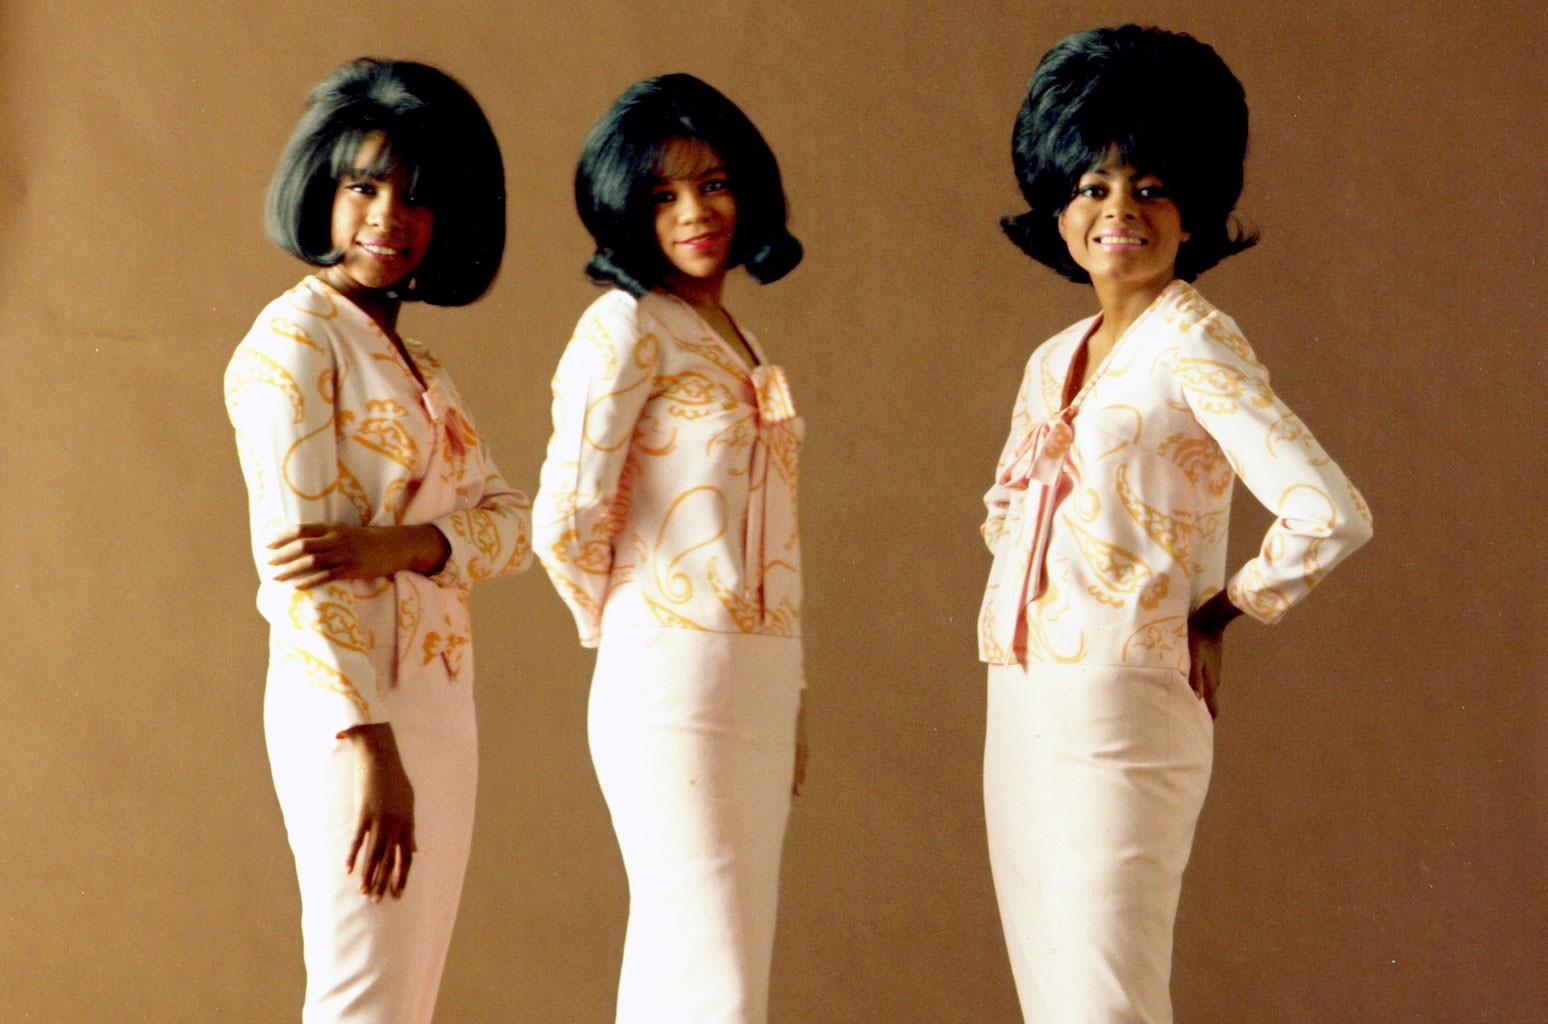 "Mary Wilson," an Interview with Martha Reeves